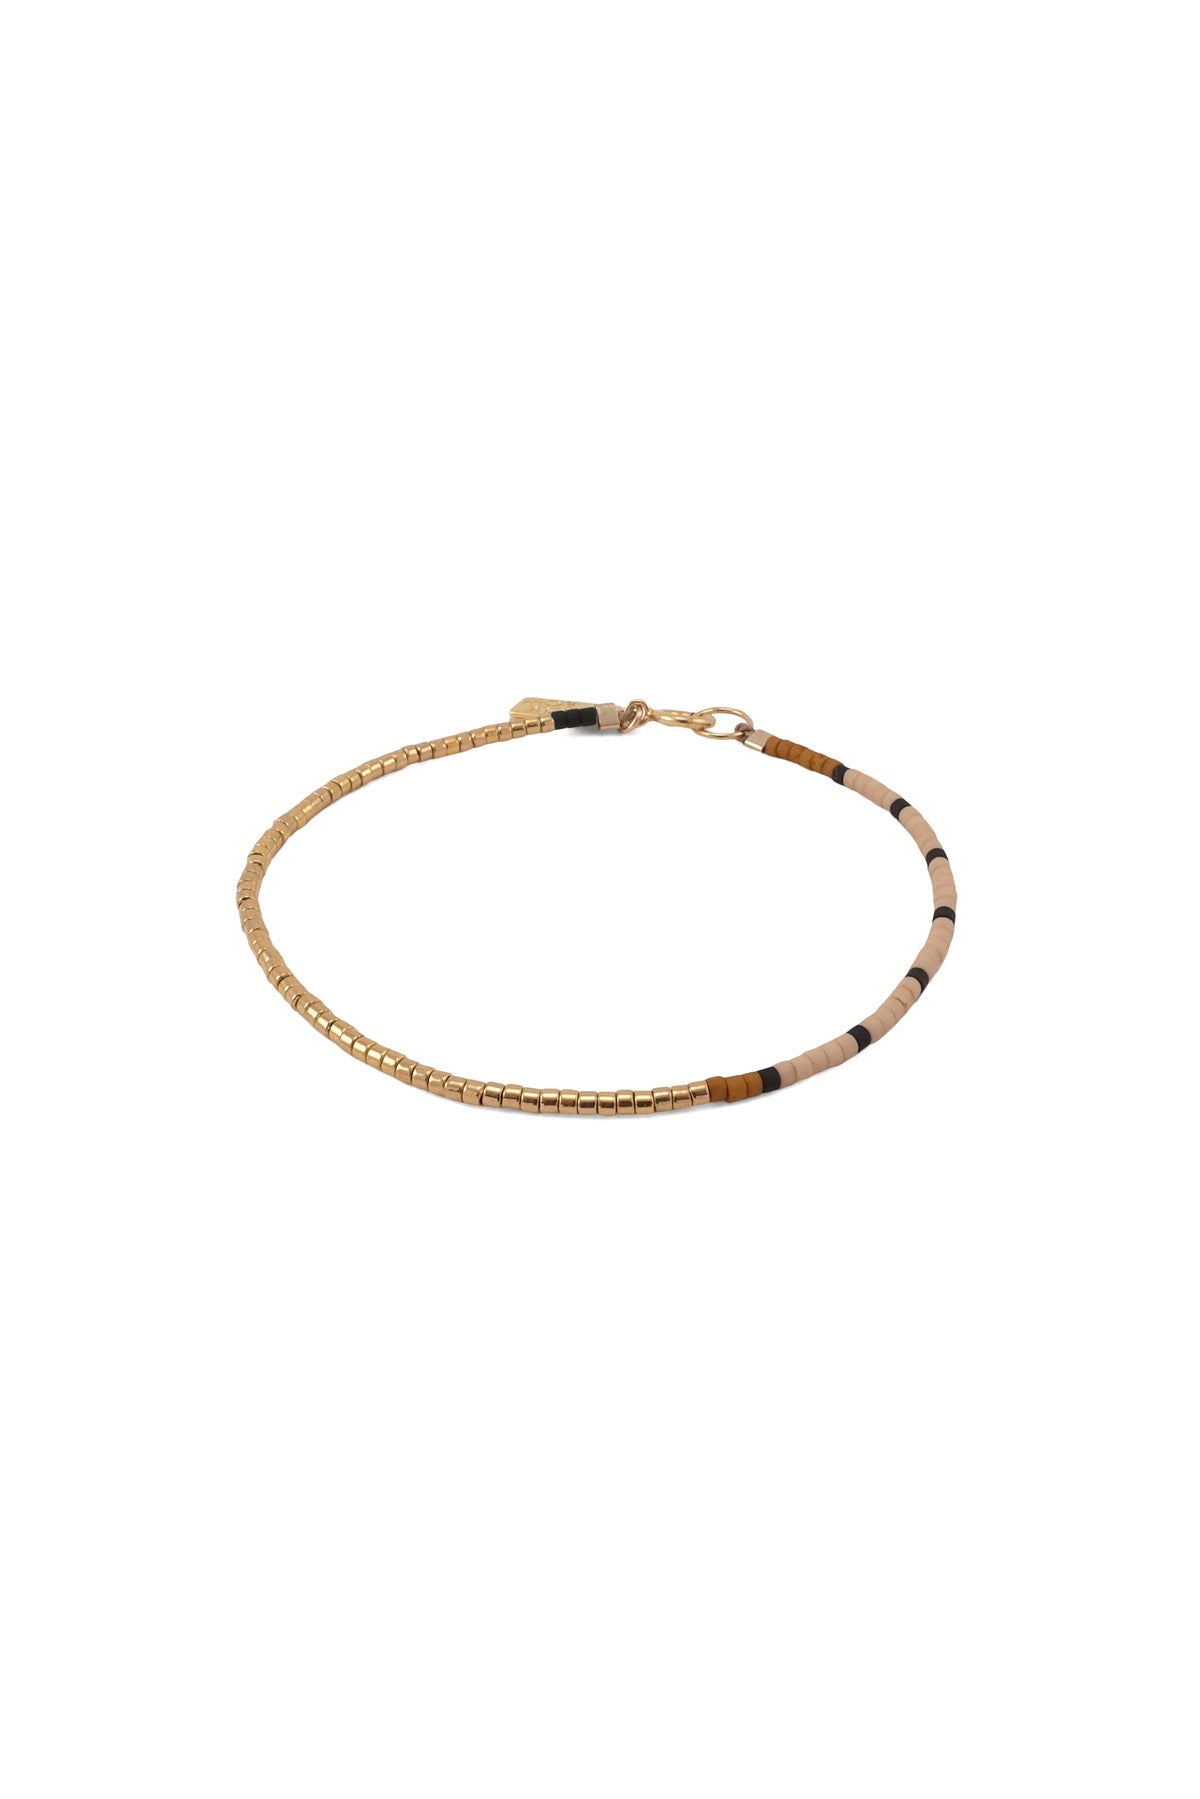 The Nootka Bracelet has an asymmetrical design featuring a long gold beaded segment and a sequence of black beads among a stretch of palette colors.